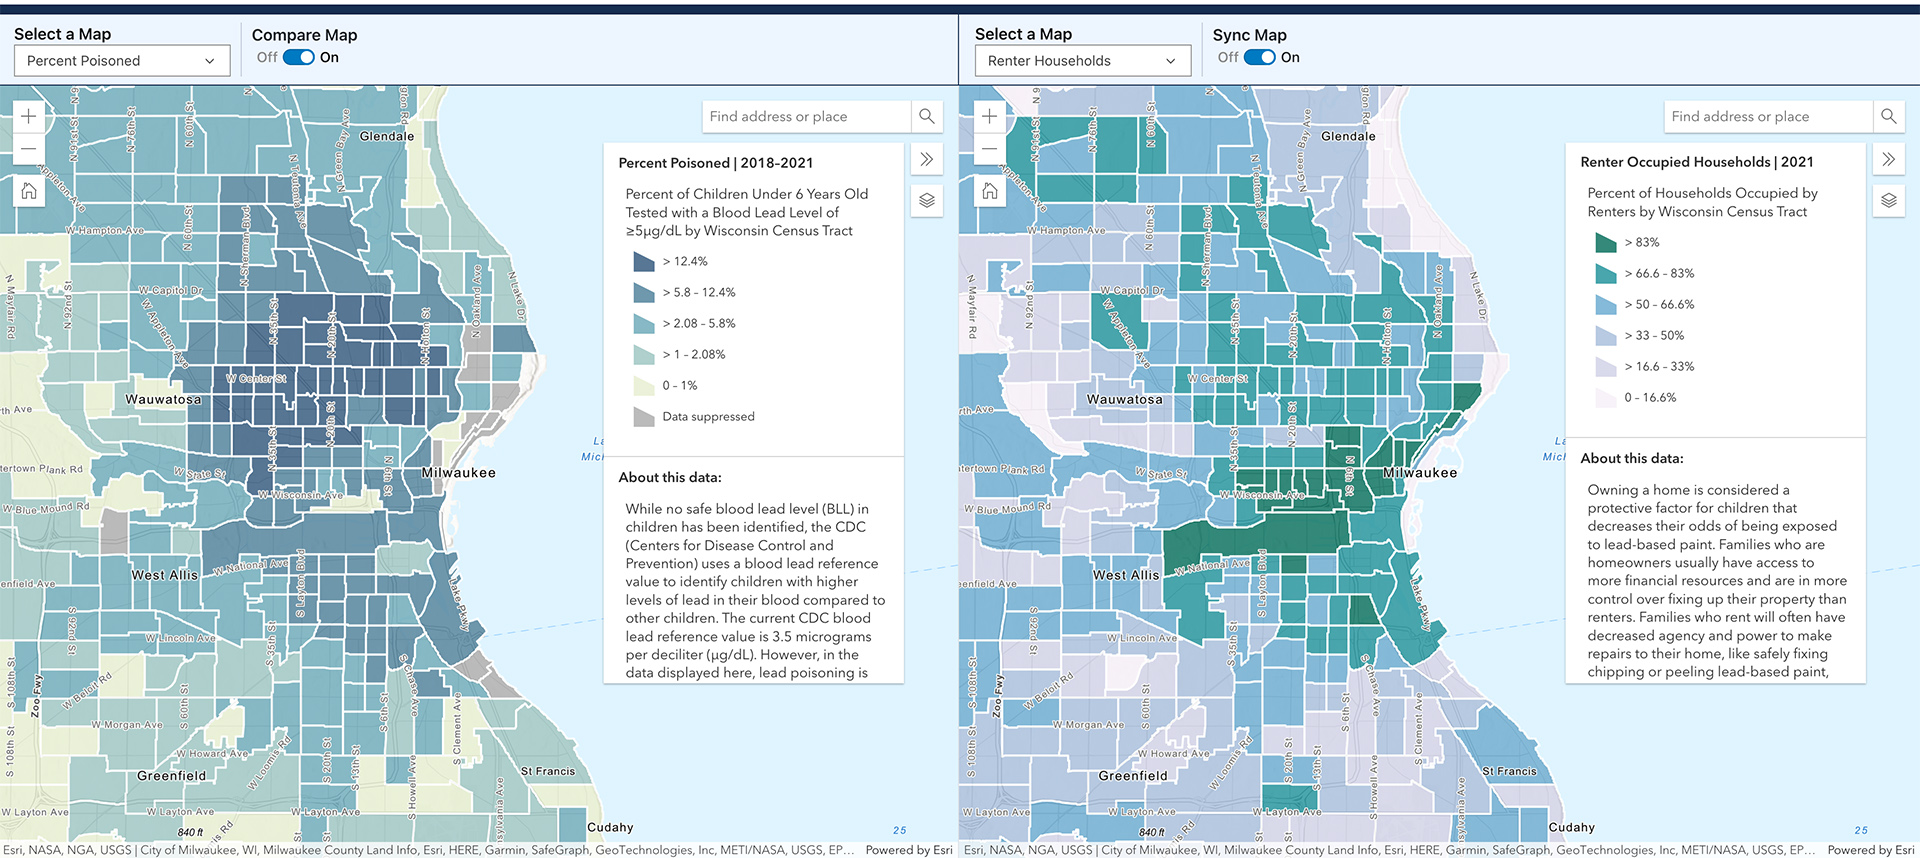 Two side-by-side maps show rates of lead poisoning among children under 6 years old and percent of households occupied by renters in difference census tracts in Milwaukee and surrounding areas, with color coding showing differences in degree for each measure.